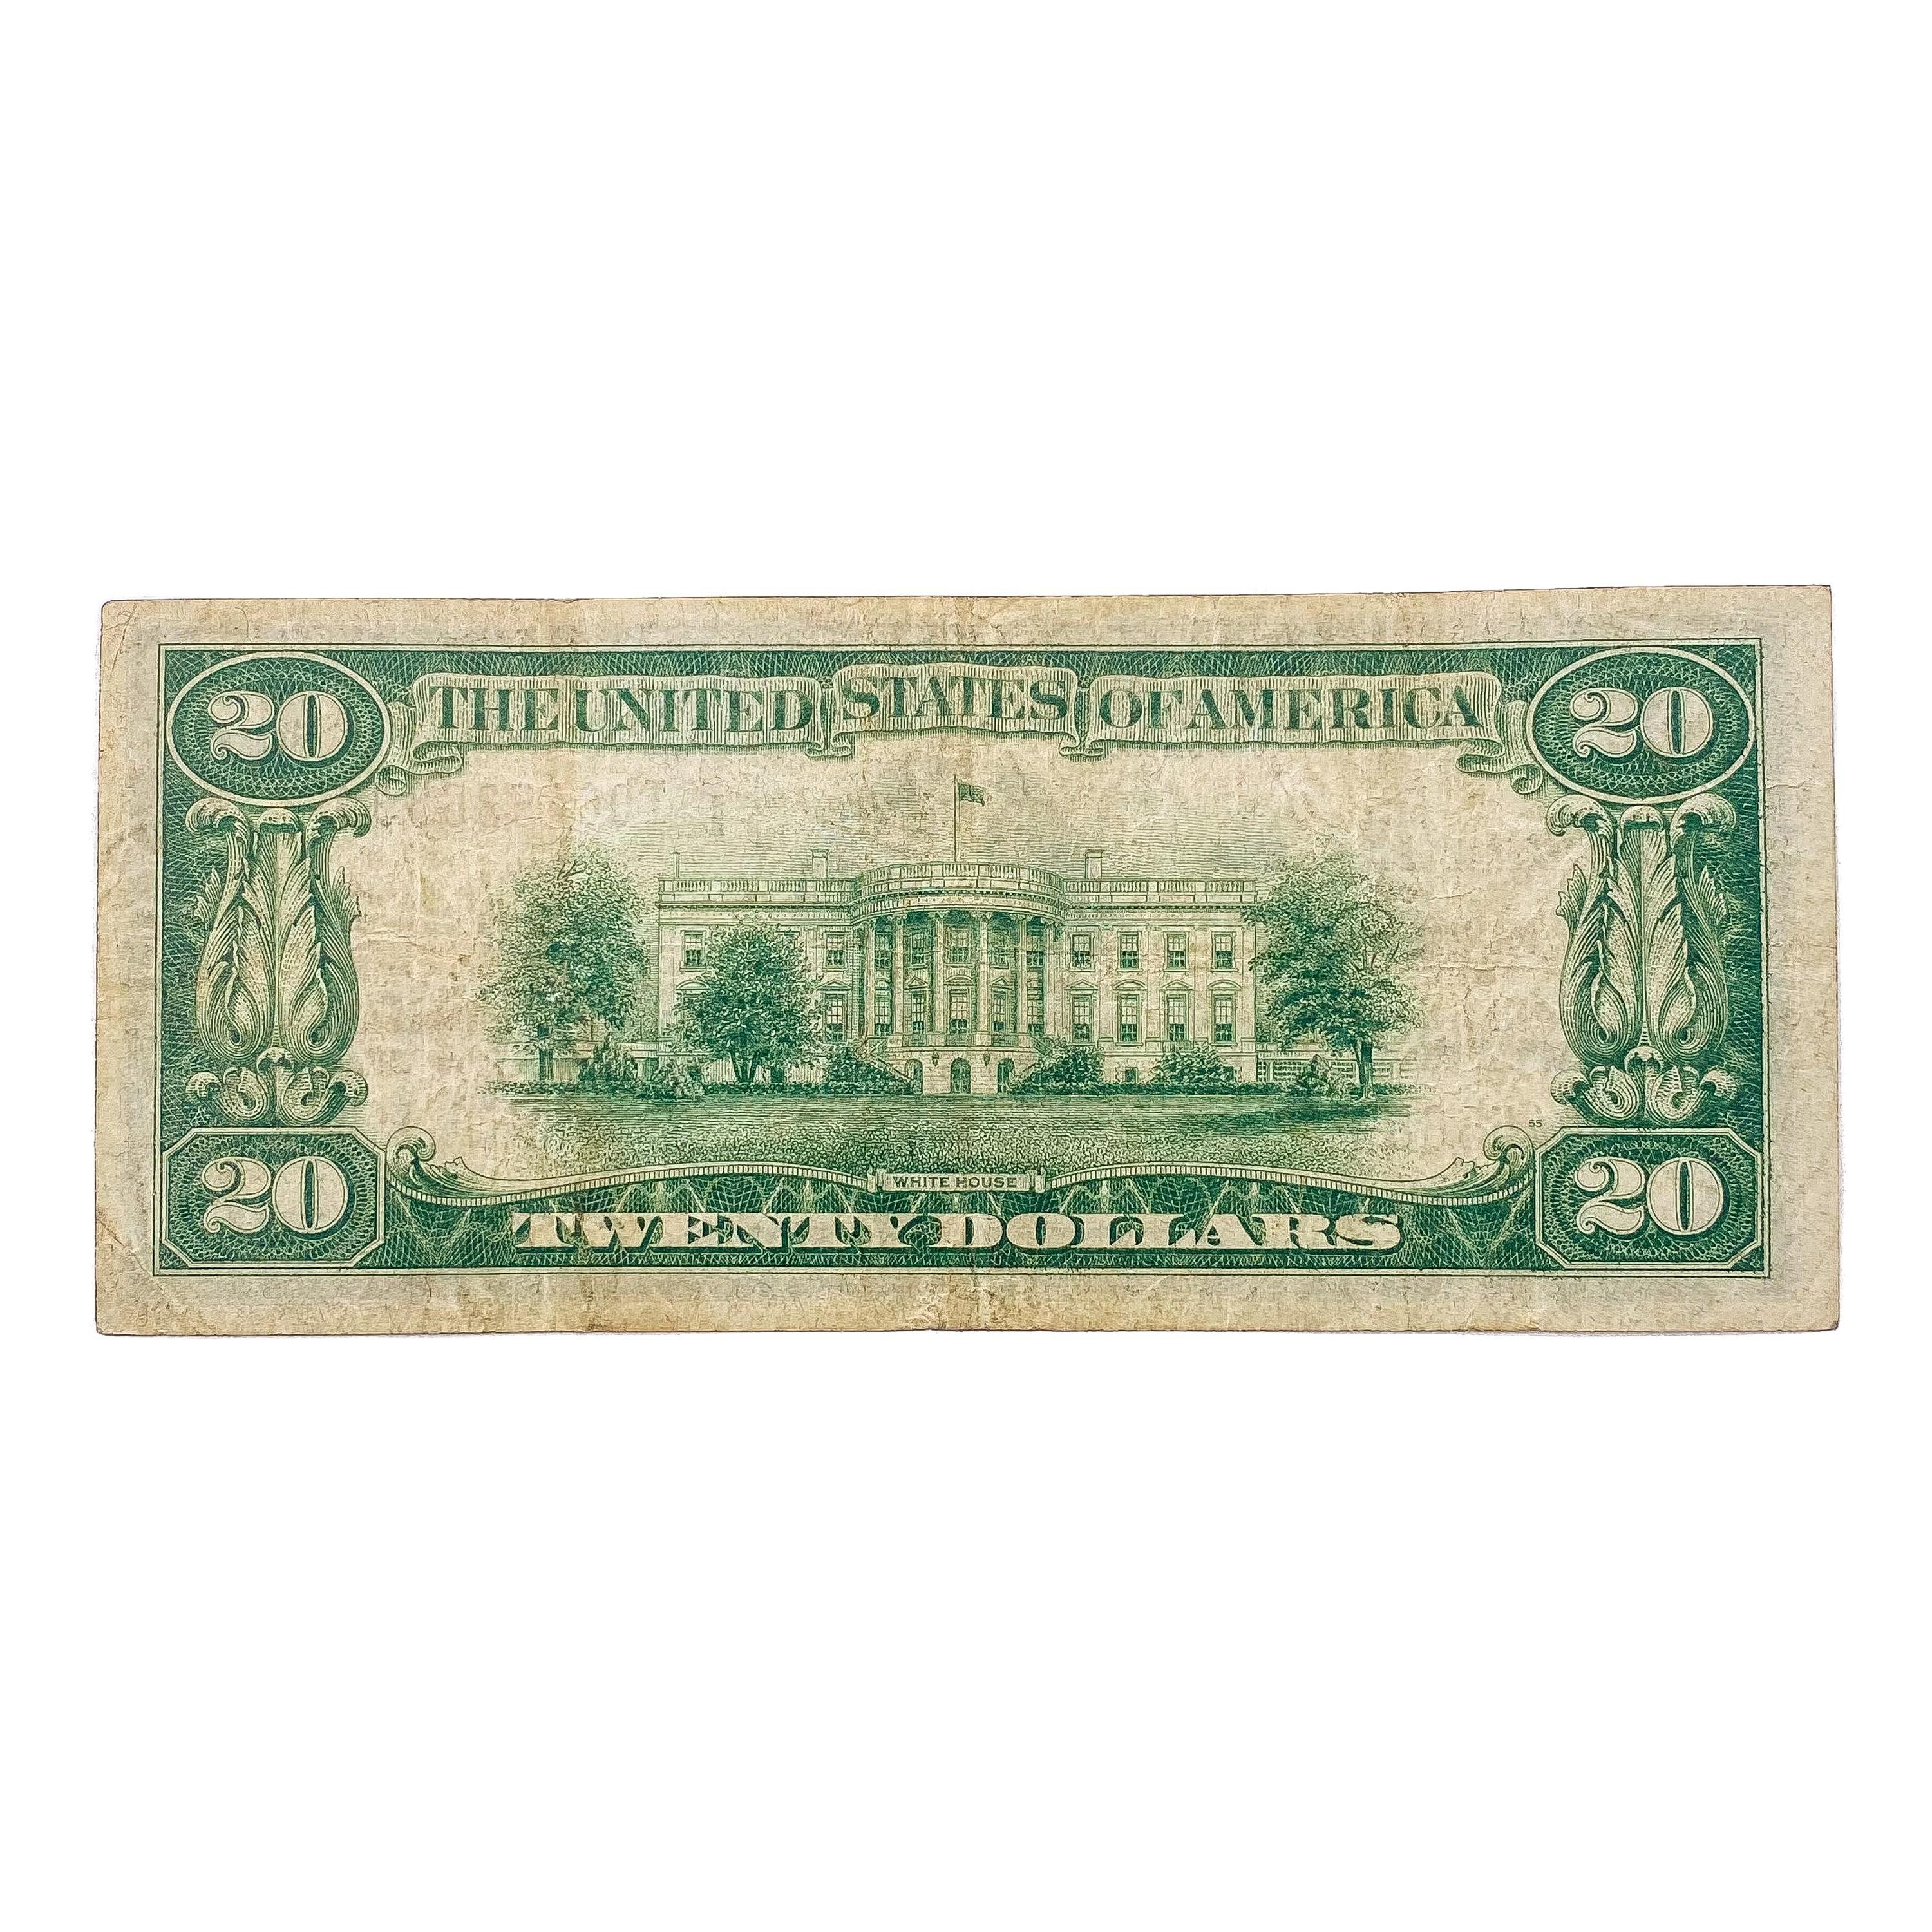 1929 $20 US MinneapolIs Bank, MO Fed Res Note